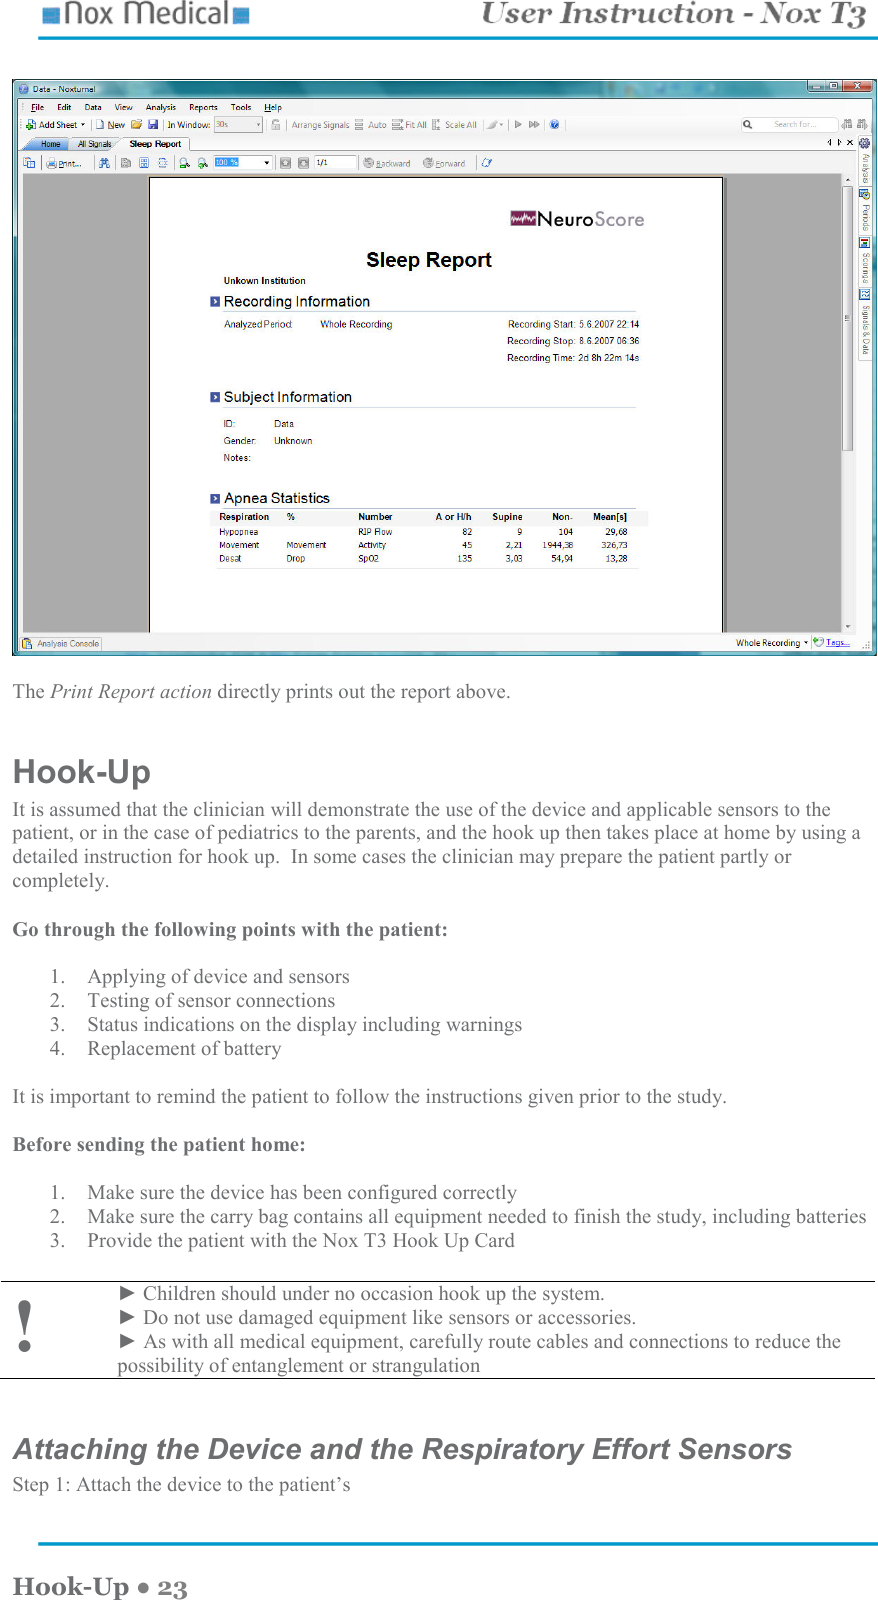    Hook-Up ● 23    The Print Report action directly prints out the report above.  Hook-Up  It is assumed that the clinician will demonstrate the use of the device and applicable sensors to the patient, or in the case of pediatrics to the parents, and the hook up then takes place at home by using a detailed instruction for hook up.  In some cases the clinician may prepare the patient partly or completely.    Go through the following points with the patient:    1. Applying of device and sensors 2. Testing of sensor connections 3. Status indications on the display including warnings 4. Replacement of battery  It is important to remind the patient to follow the instructions given prior to the study.    Before sending the patient home:  1. Make sure the device has been configured correctly  2. Make sure the carry bag contains all equipment needed to finish the study, including batteries 3. Provide the patient with the Nox T3 Hook Up Card  ! ► Children should under no occasion hook up the system.   ► Do not use damaged equipment like sensors or accessories. ► As with all medical equipment, carefully route cables and connections to reduce the possibility of entanglement or strangulation  Attaching the Device and the Respiratory Effort Sensors Step 1: Attach the device to the patient’s   